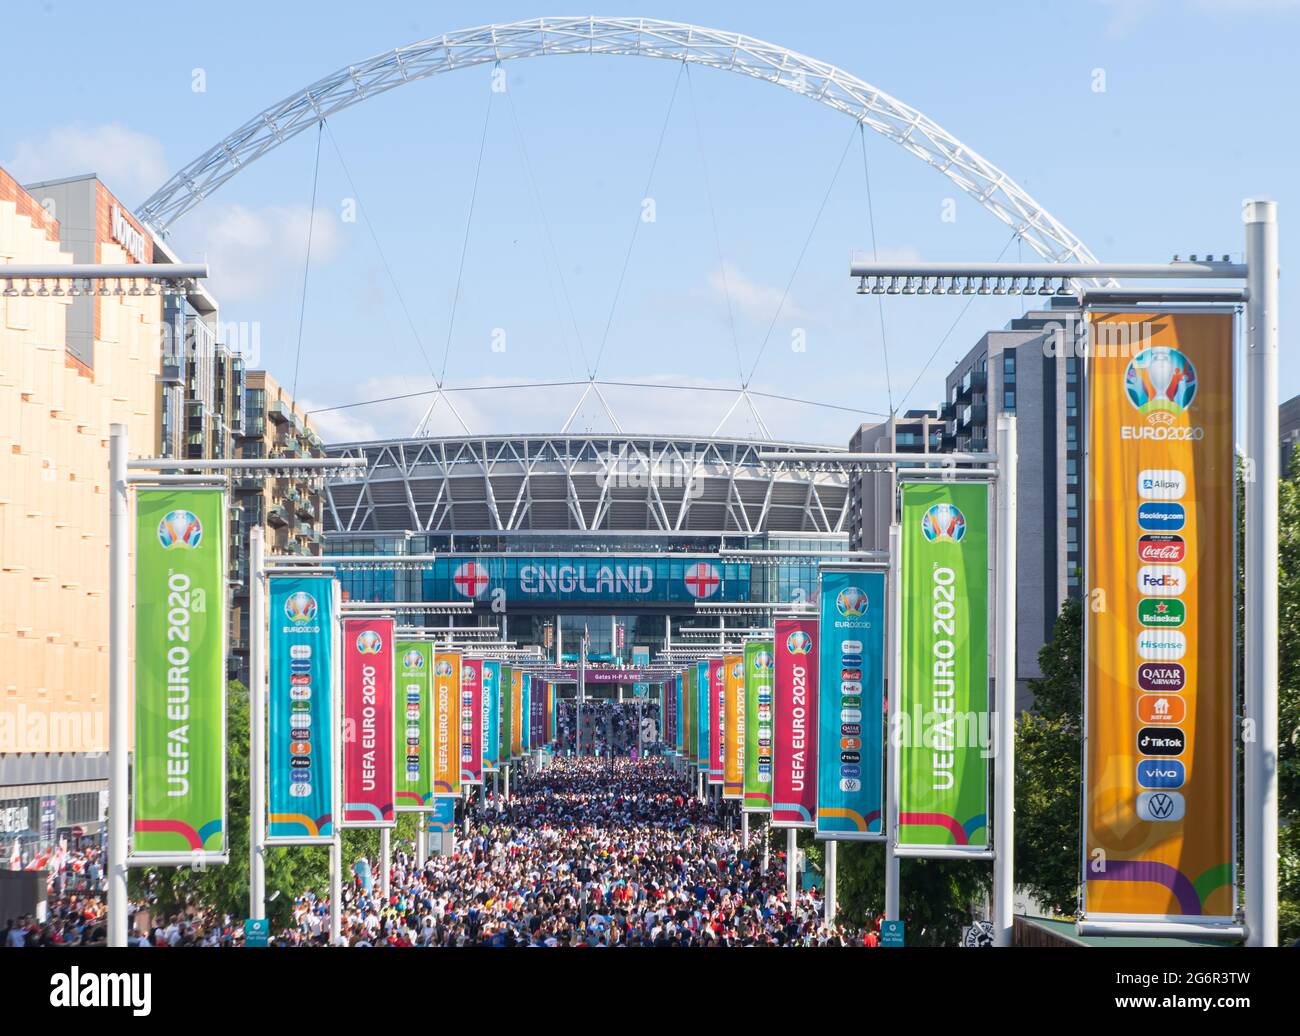 London, UK. 7th July, 2021. General view outside the stadium ahead of UEFA Euro 2020 Championship Semi Final match between England and Denmark at Wembley Stadium. Credit: Michael Tubi/Alamy Live News Stock Photo